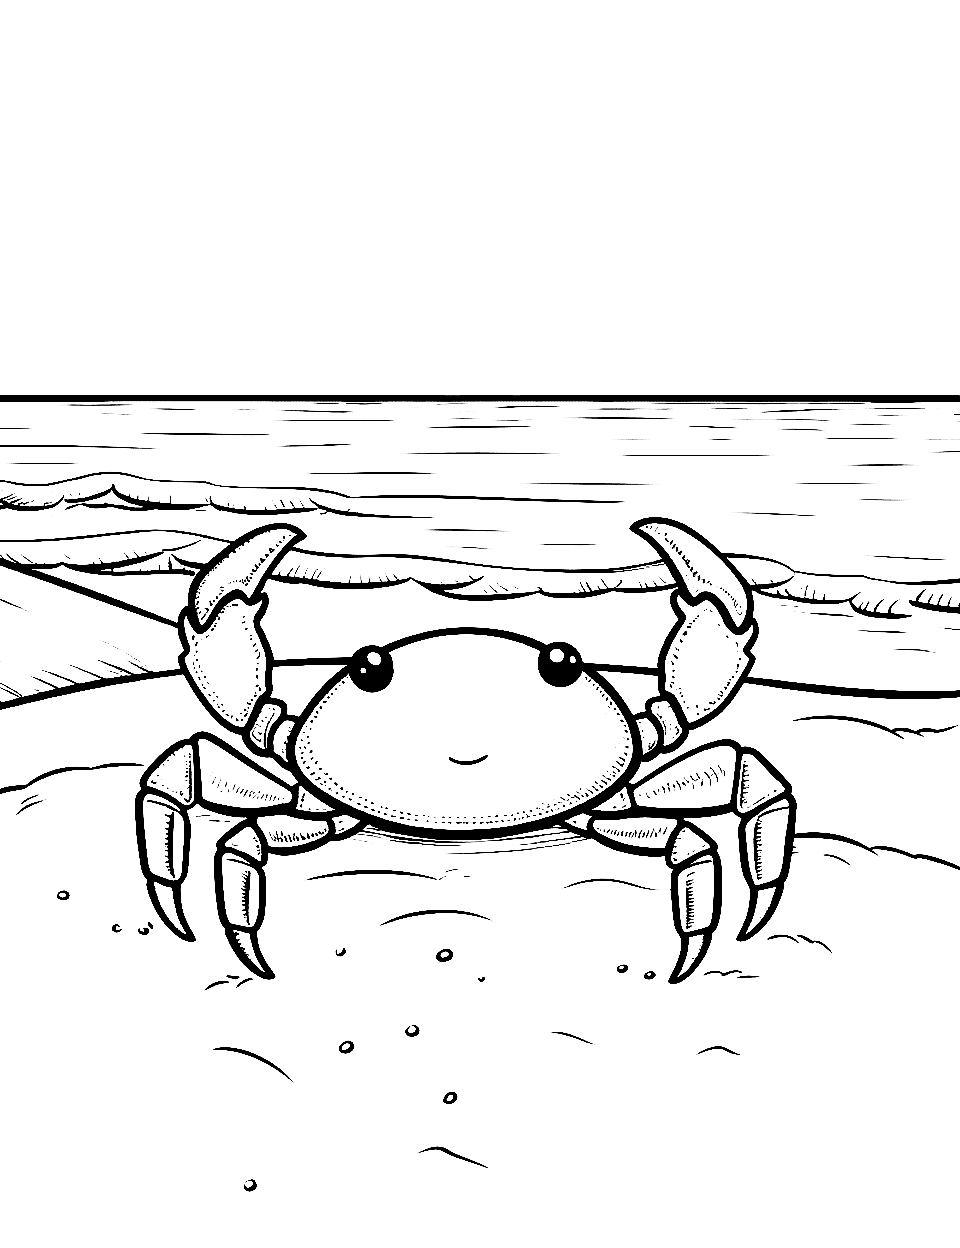 Crab Walking on the Shore Ocean Coloring Page - A crab walking on the sandy beach, with waves nearby.